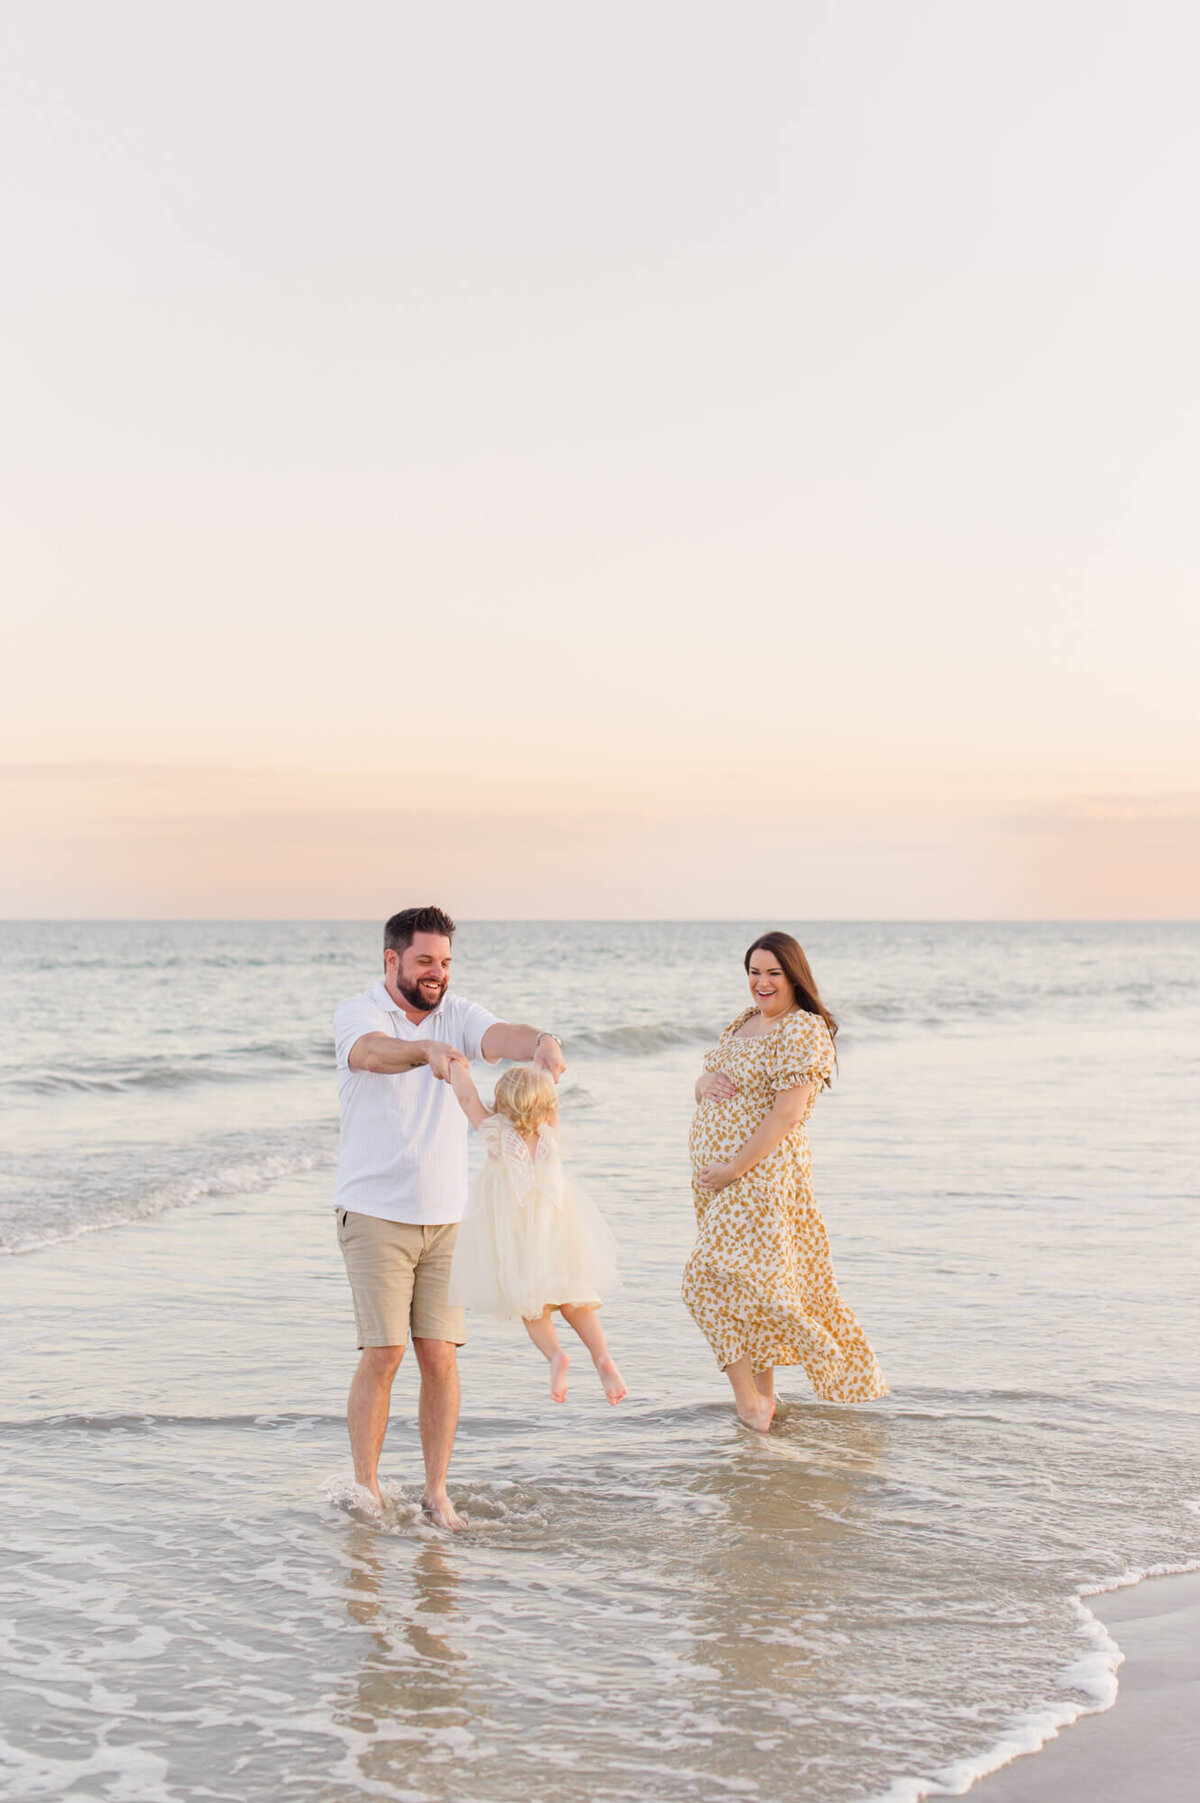 Orlando maternity photographer captures expectant parents playing in the ocean waves with their young toddler girl at sunset